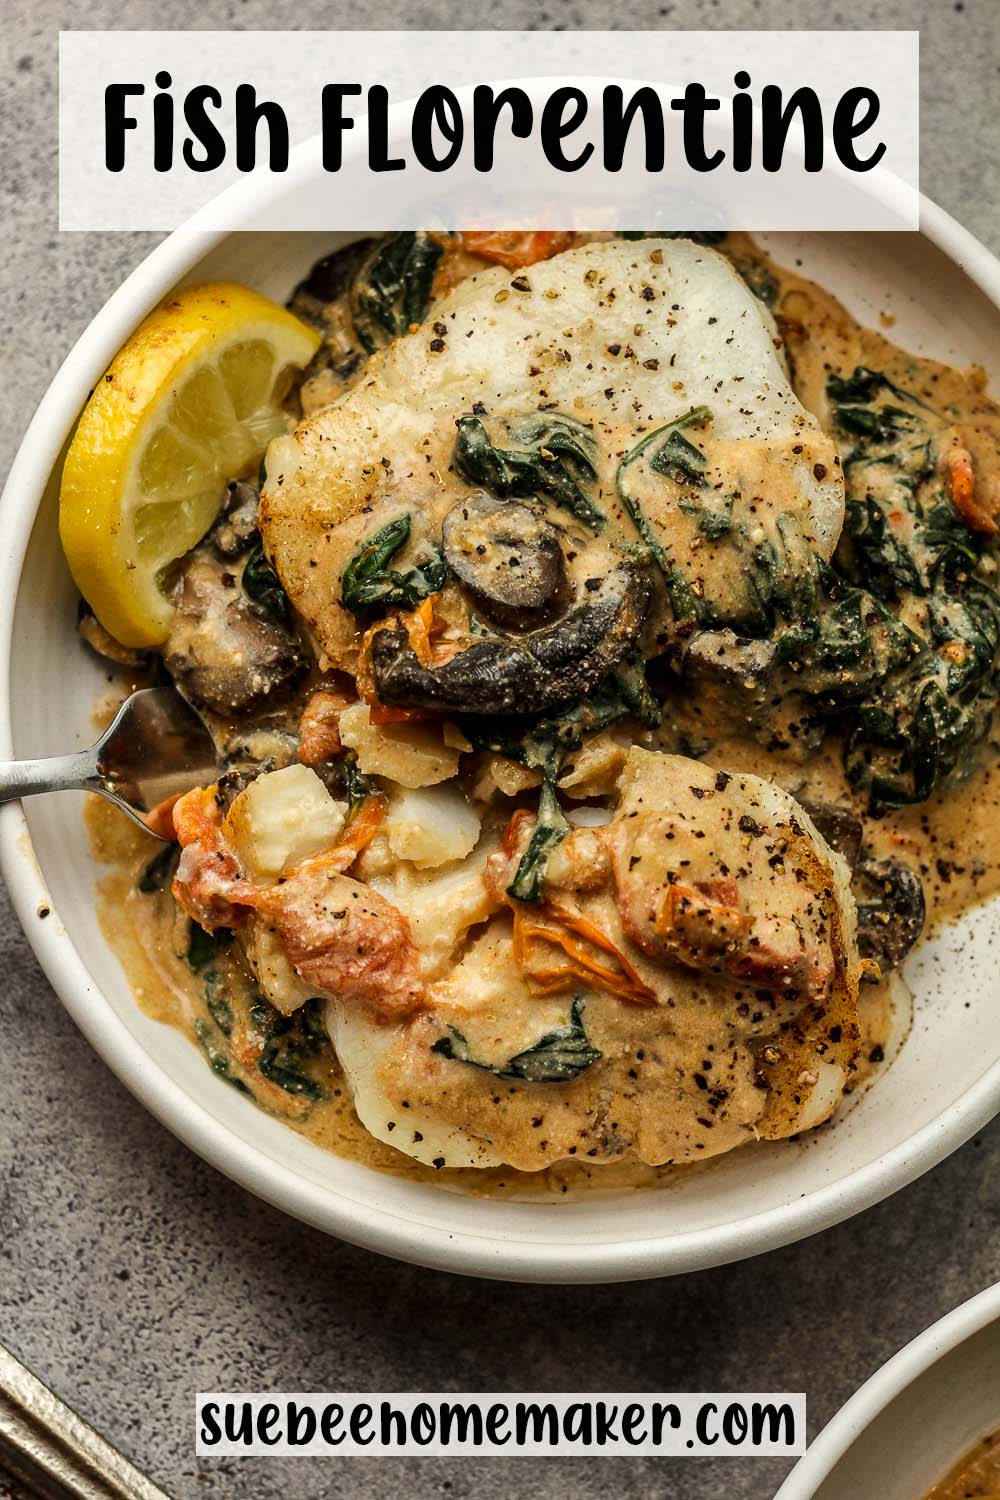 A plate of two pieces of fish Florentine and a creamy sauce.